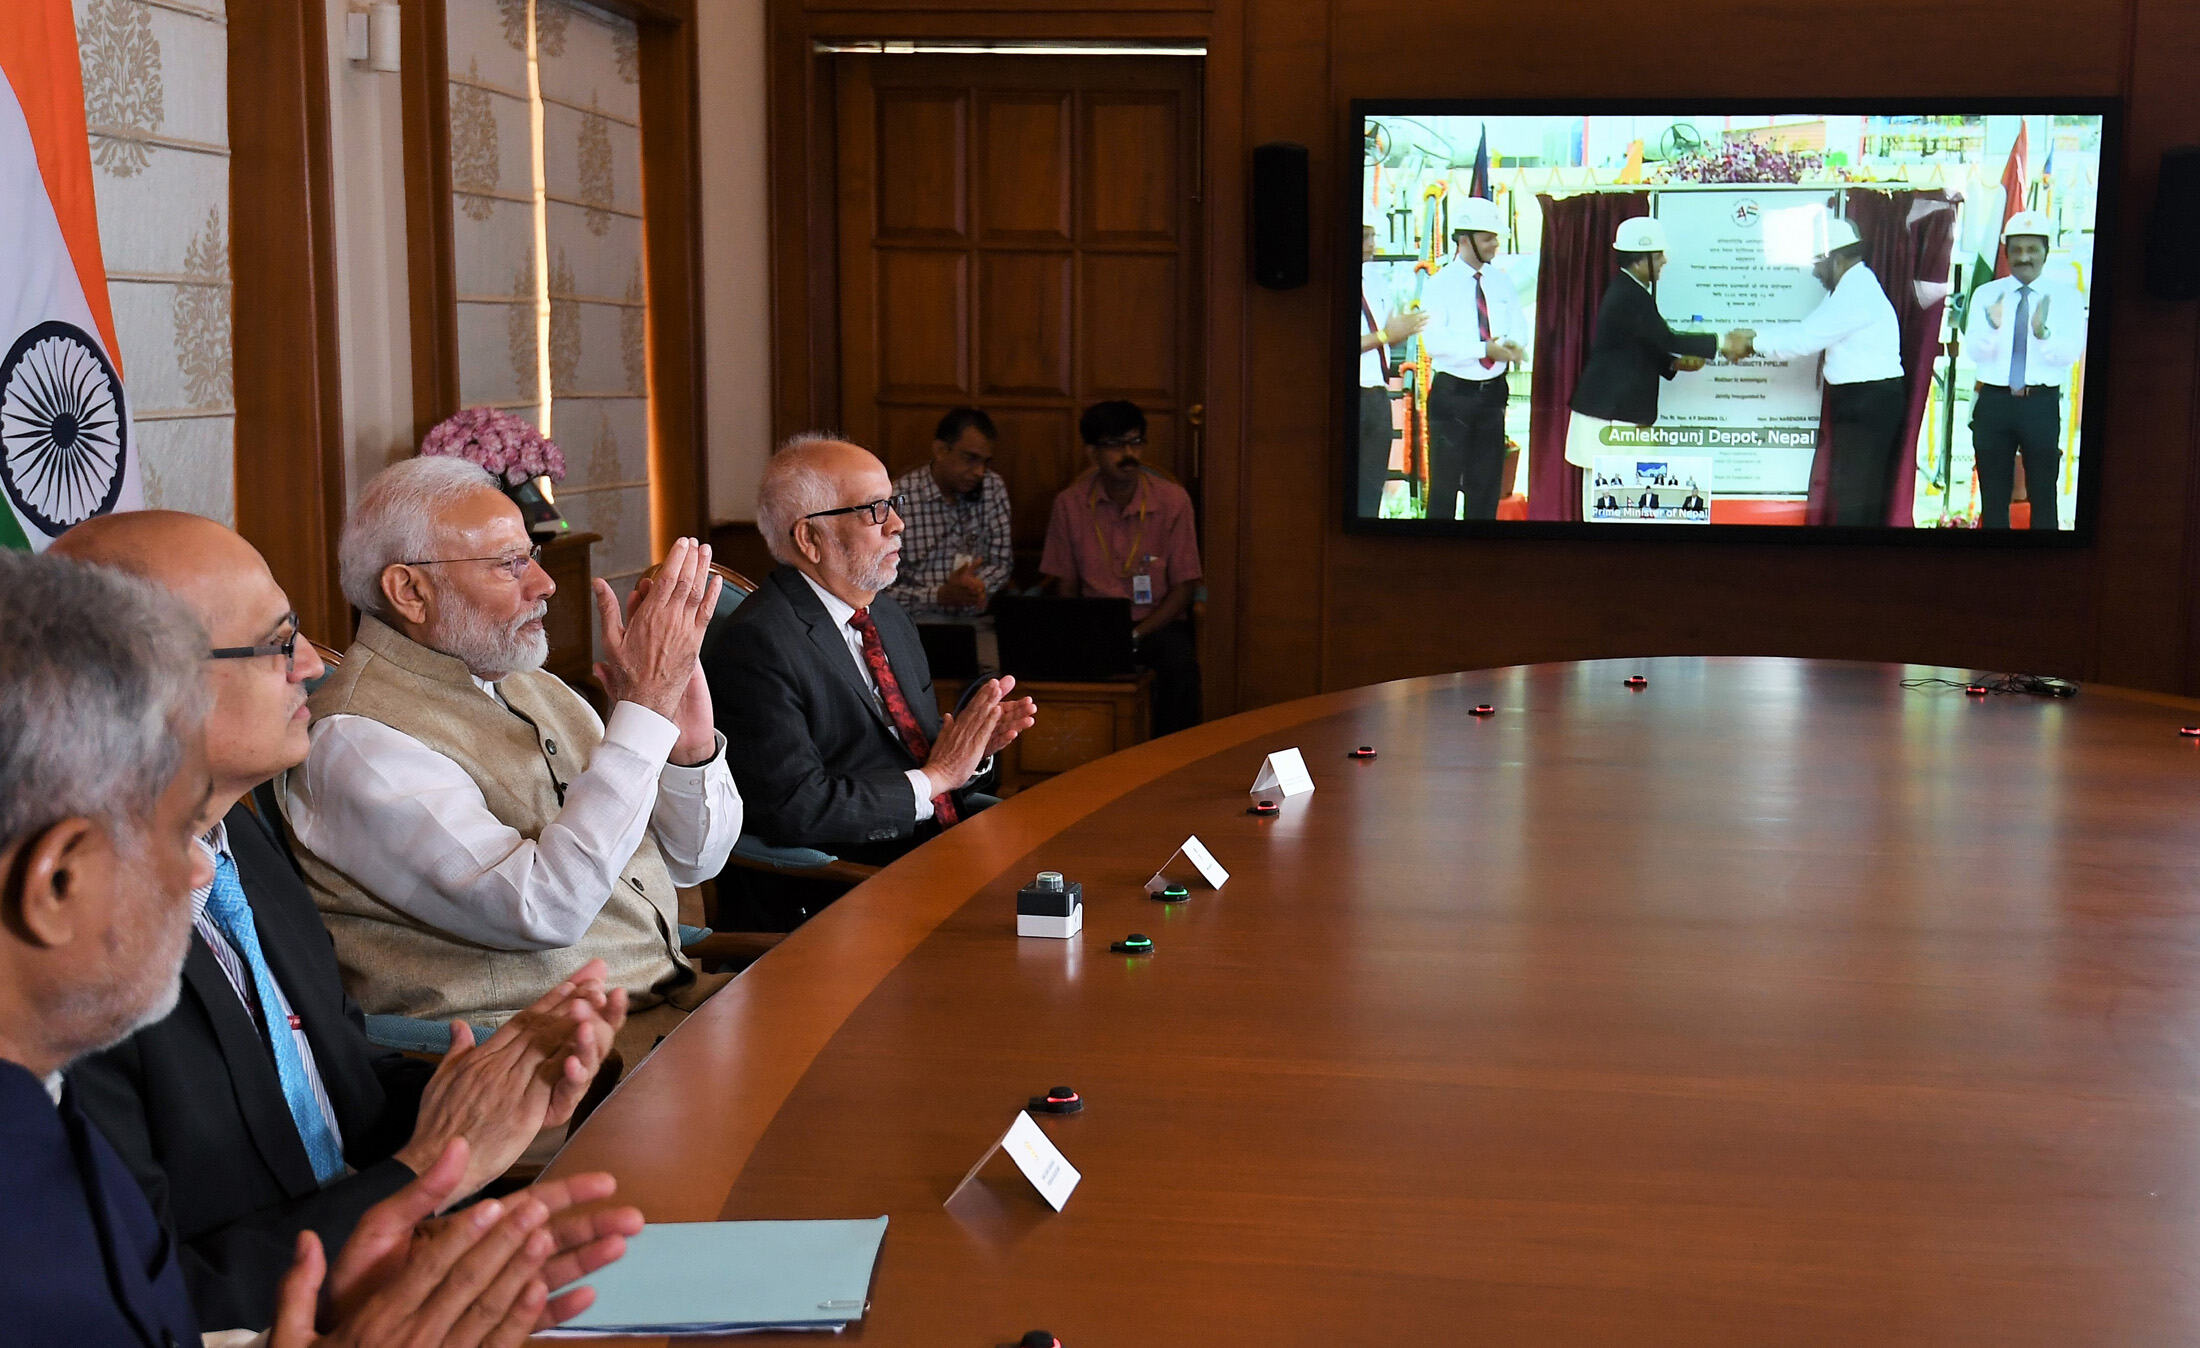 The Prime Minister,  Narendra Modi and the Prime Minister of Nepal,  K.P. Sharma Oli jointly inaugurated the South Asia’s first cross-border petroleum products pipeline from Motihari in India to Amlekhgunj in Nepal, through video conference from New Delhi on September 10, 2019.